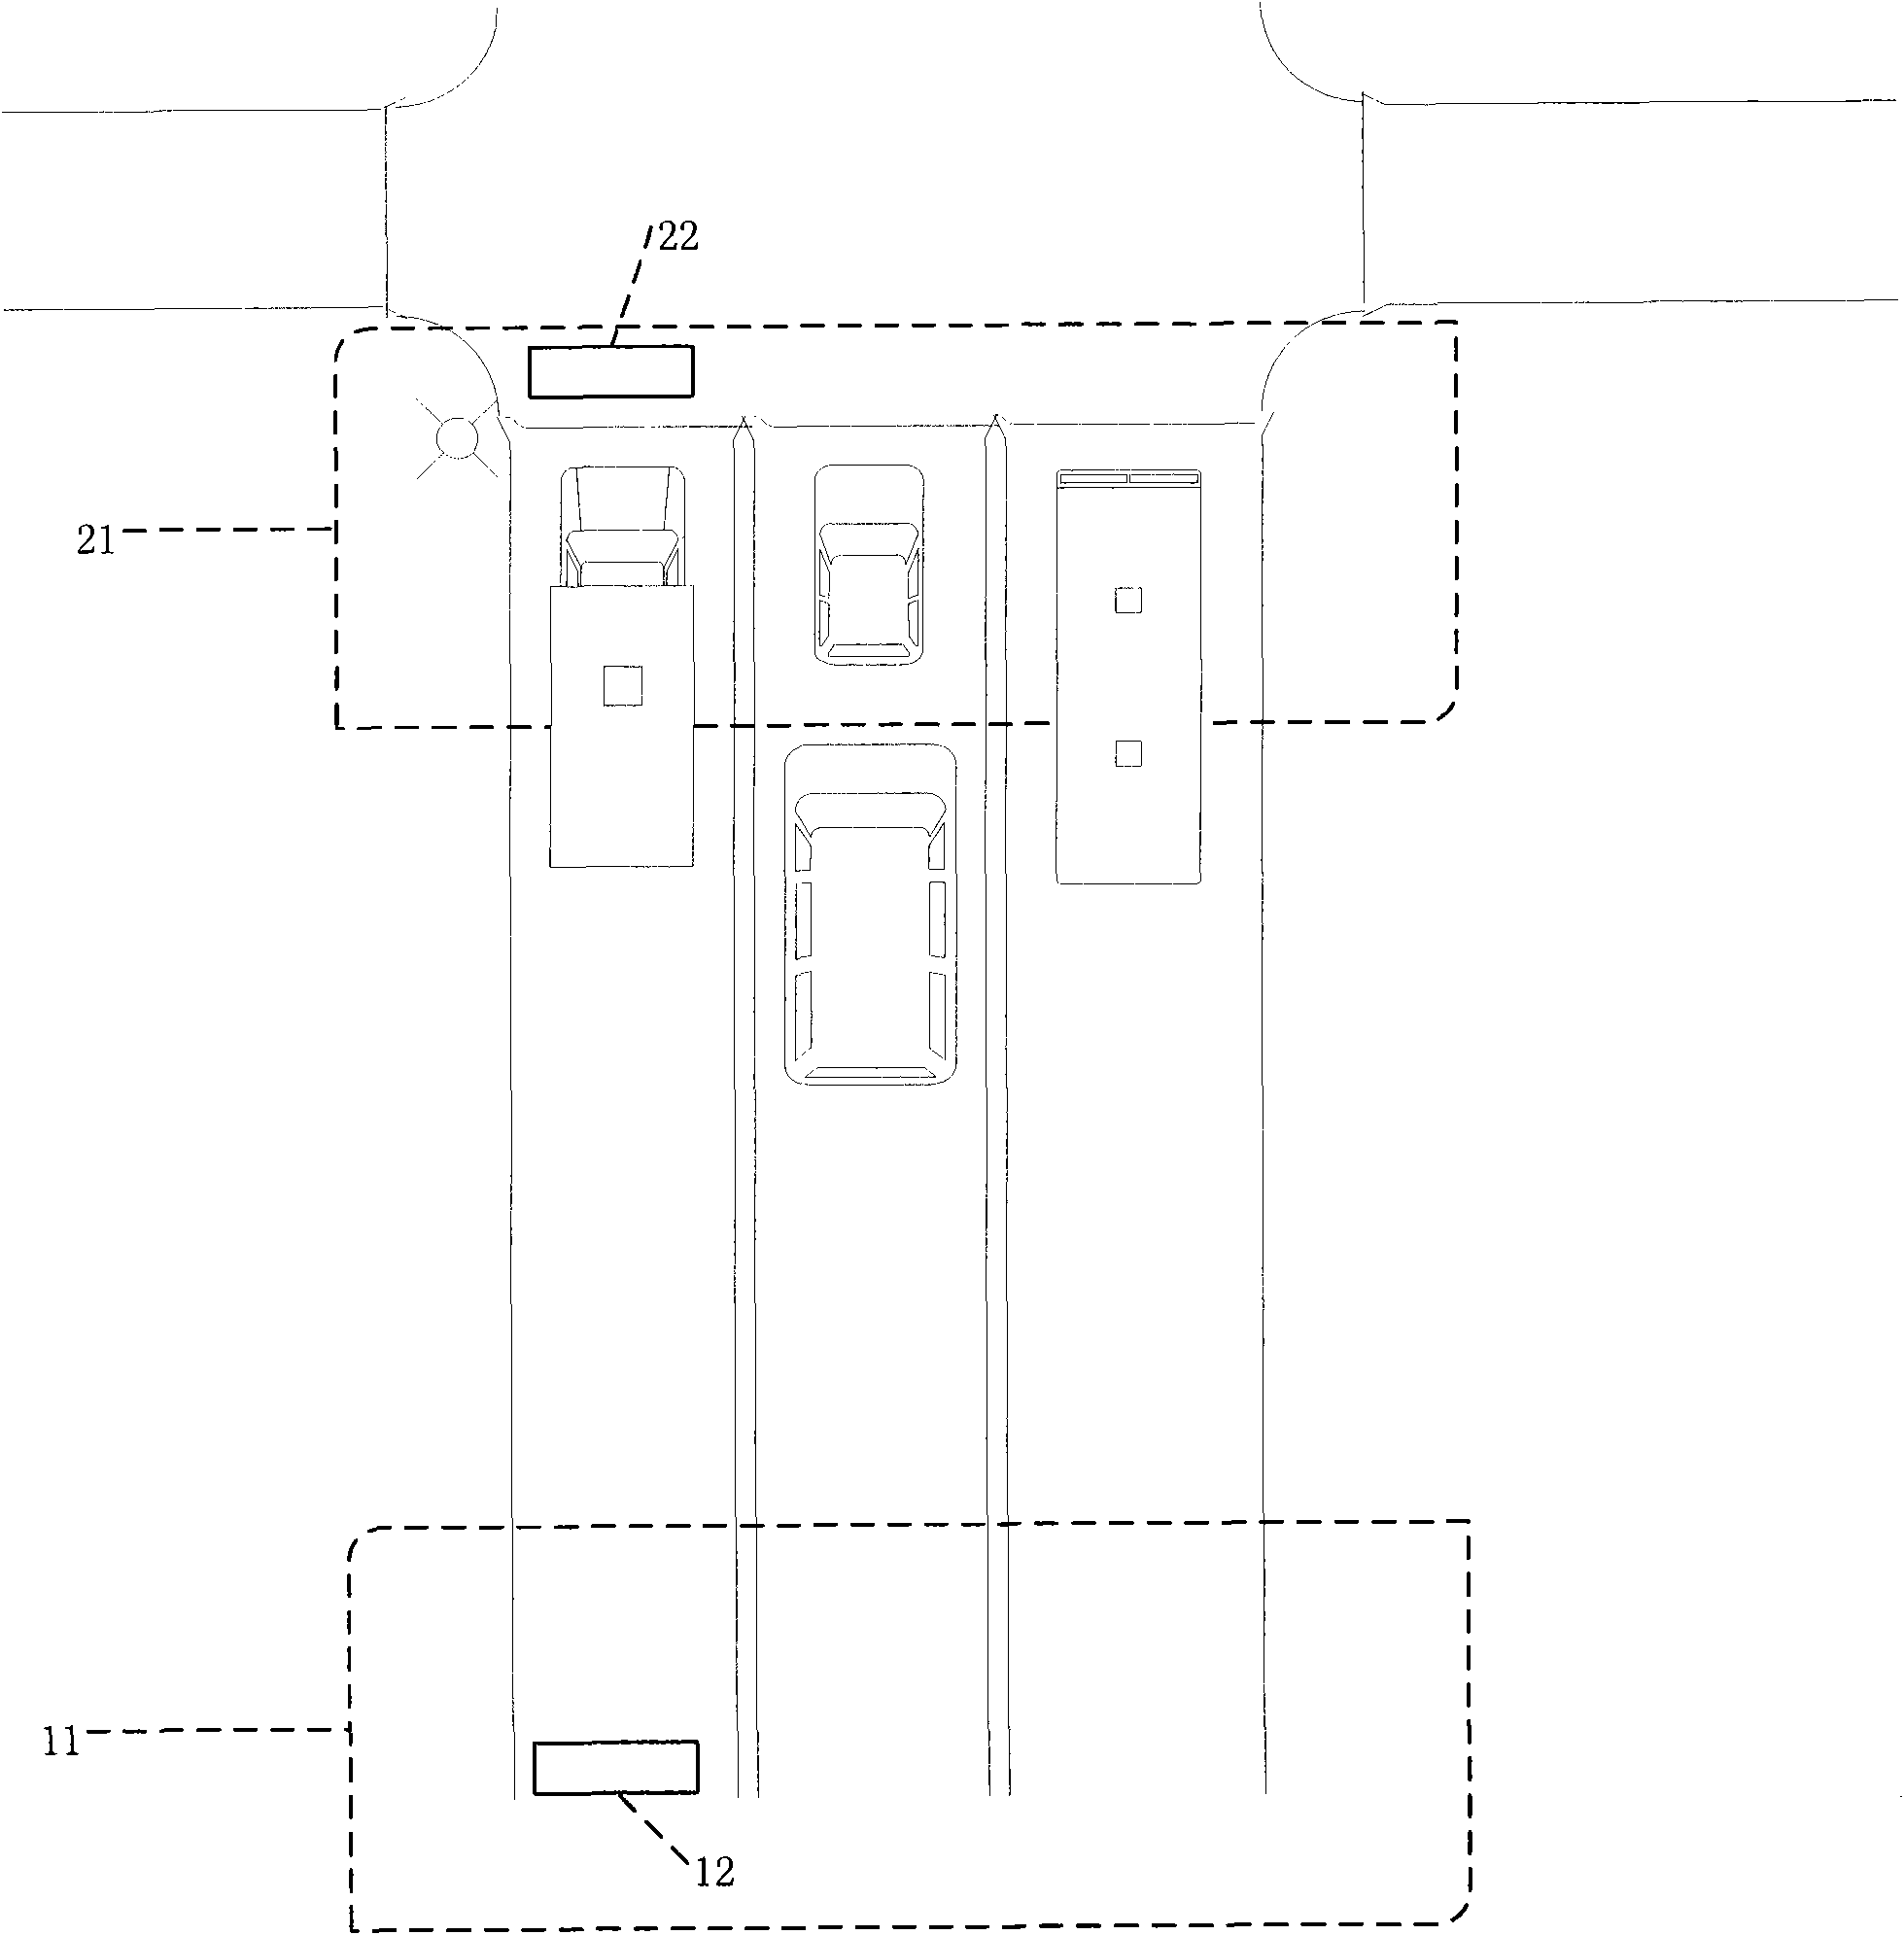 Method for acquiring mean delay of urban road junction